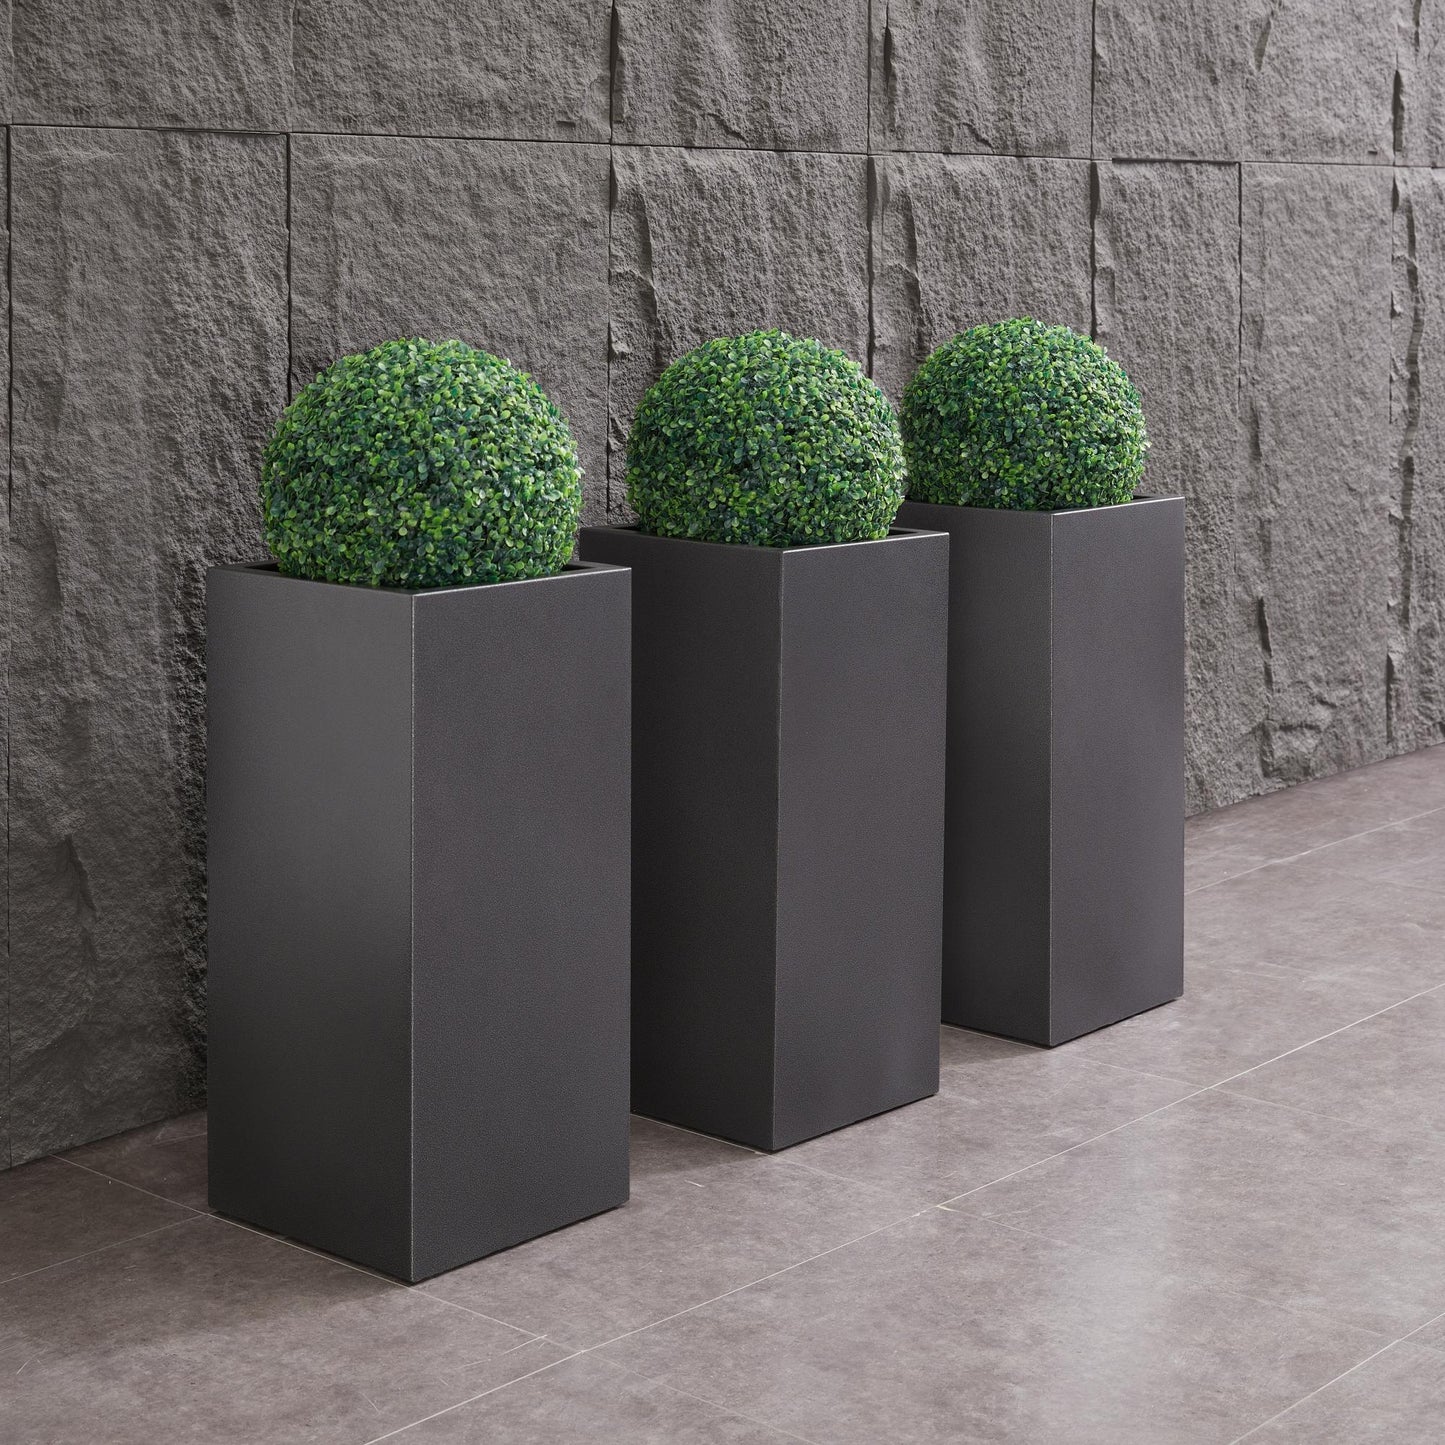 Metallic Heavy Tall Outdoor Planter Box 14x14x30H inch 80Pounds Set of 2 Gray